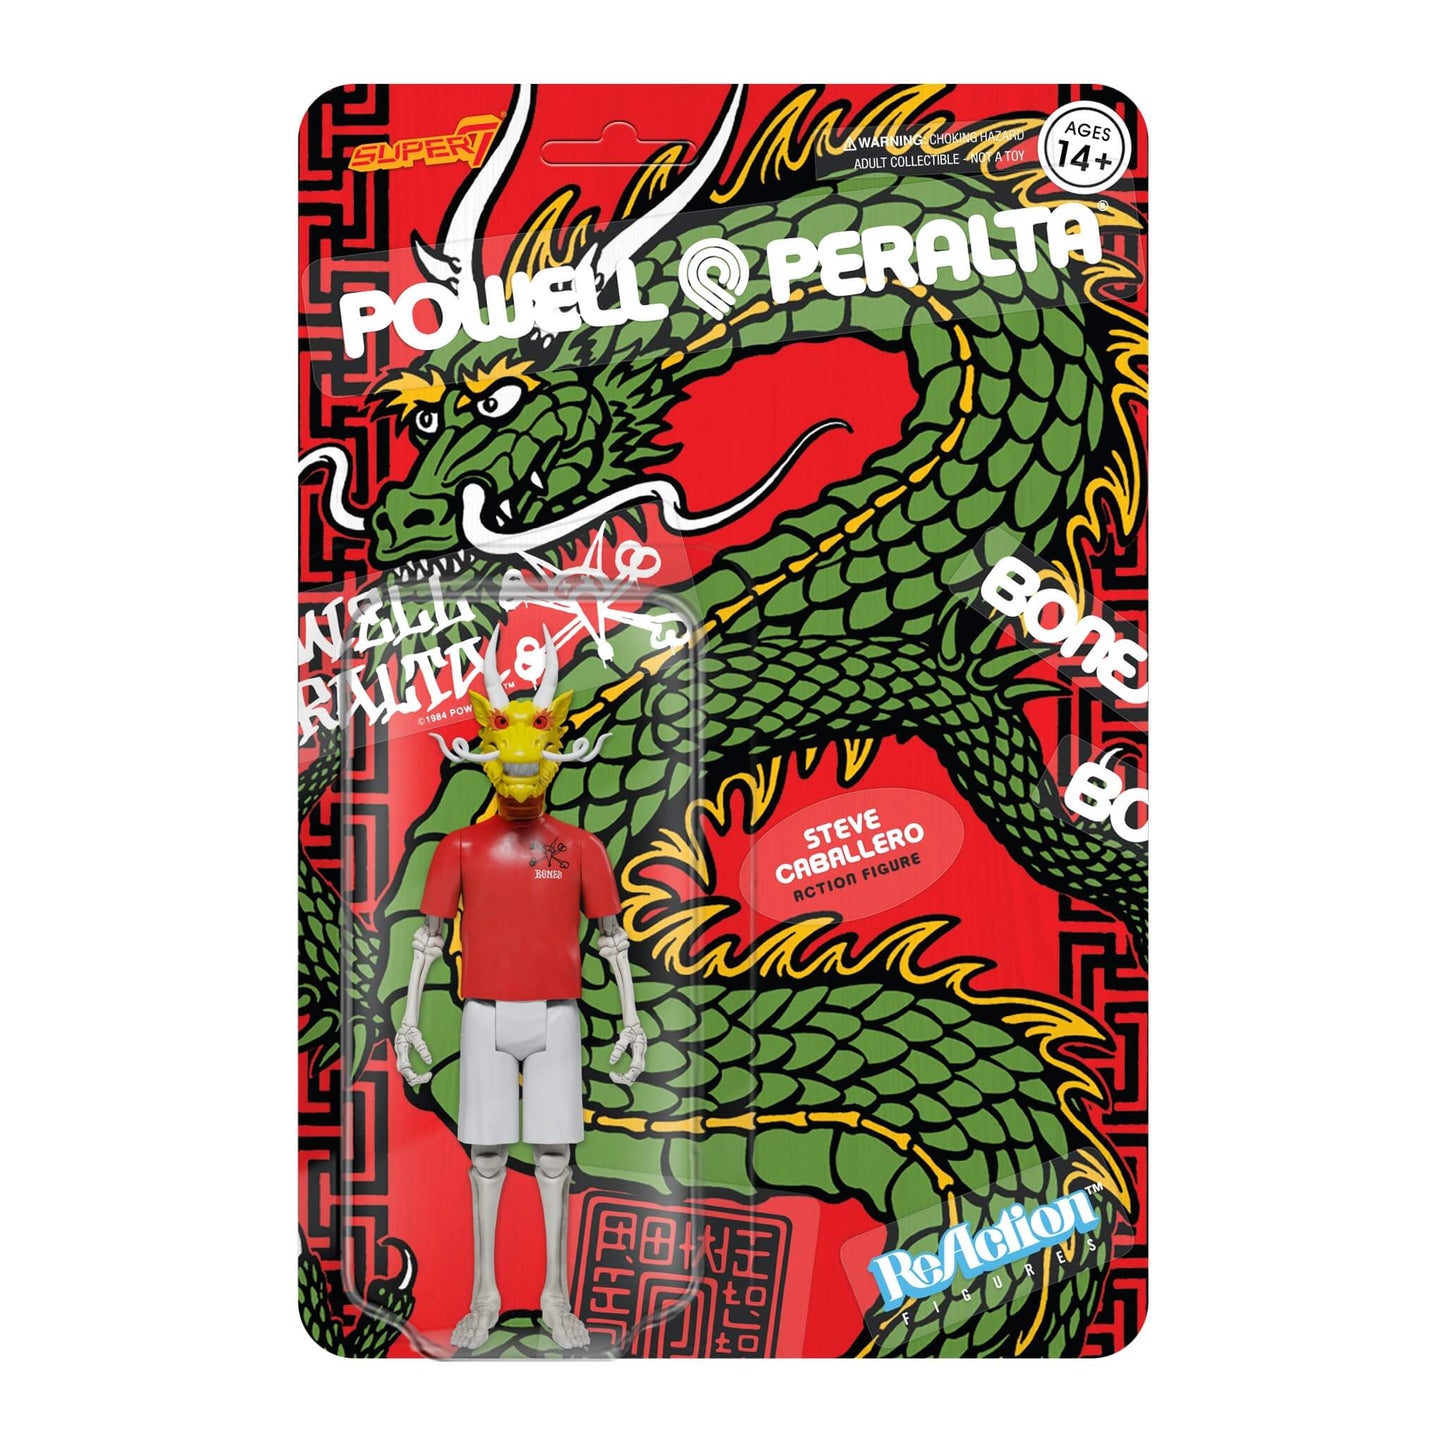 SUPER 7 POWELL PERALTA REACTION WAVE 1 STEVE CABALLERO CHINESE DRAGON